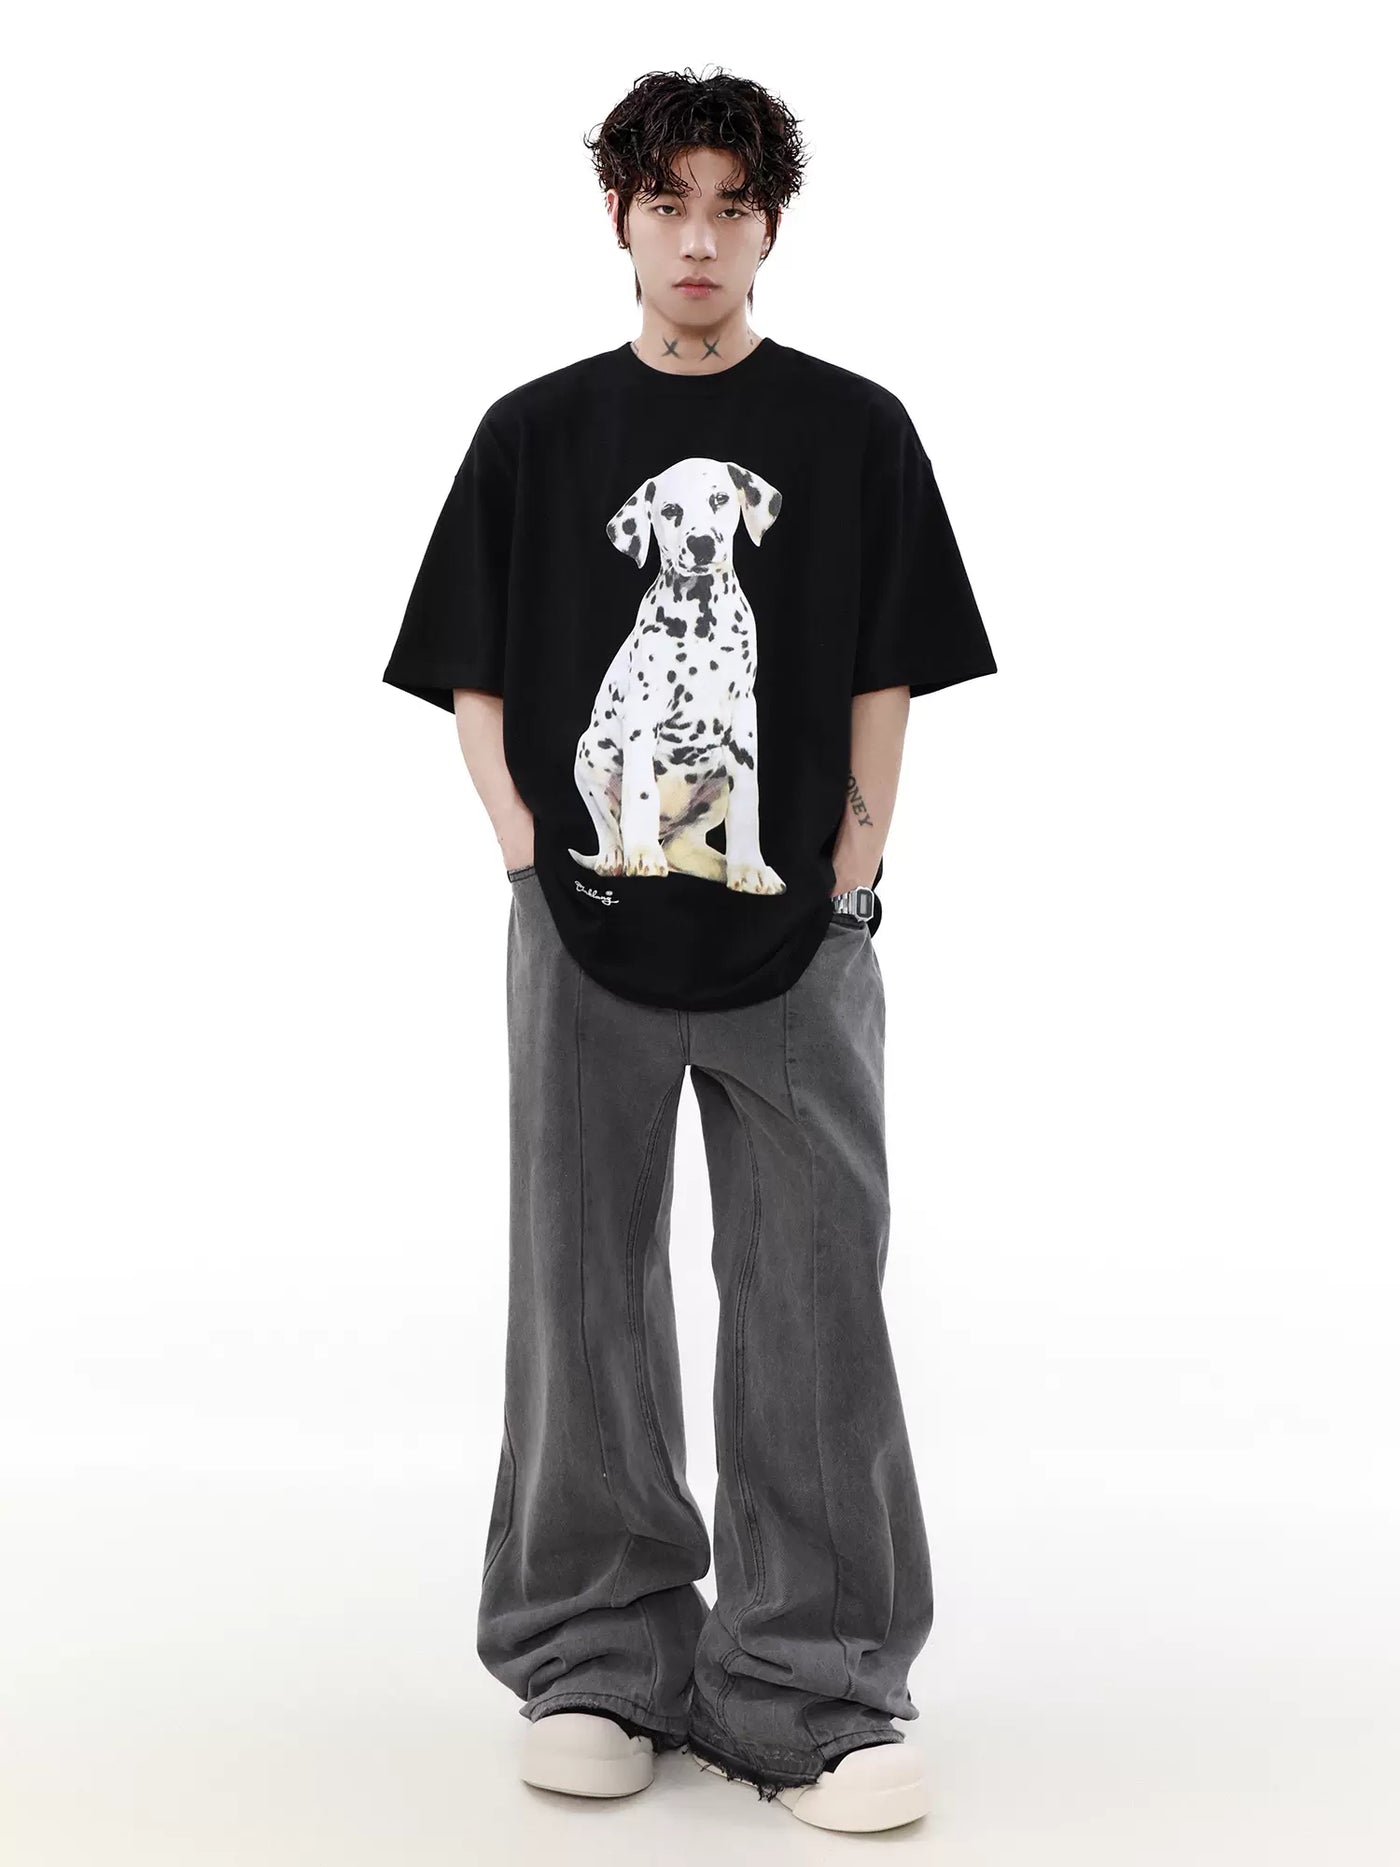 Dalmatian Dog Graphic T-Shirt Korean Street Fashion T-Shirt By Mr Nearly Shop Online at OH Vault